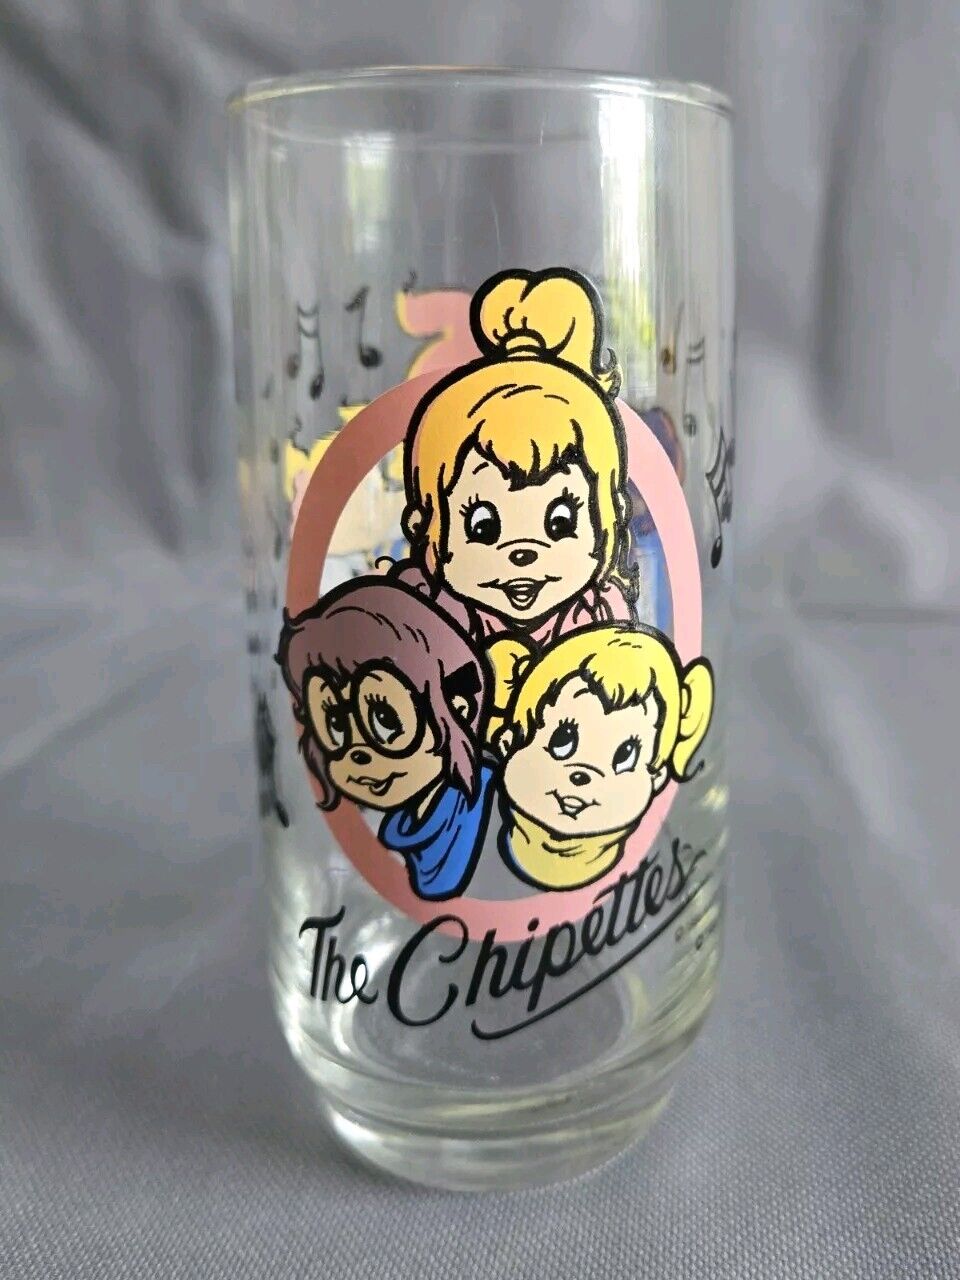 Vintage 1985 The Chipettes Glass Drinking Cup Karman/Ross Productions